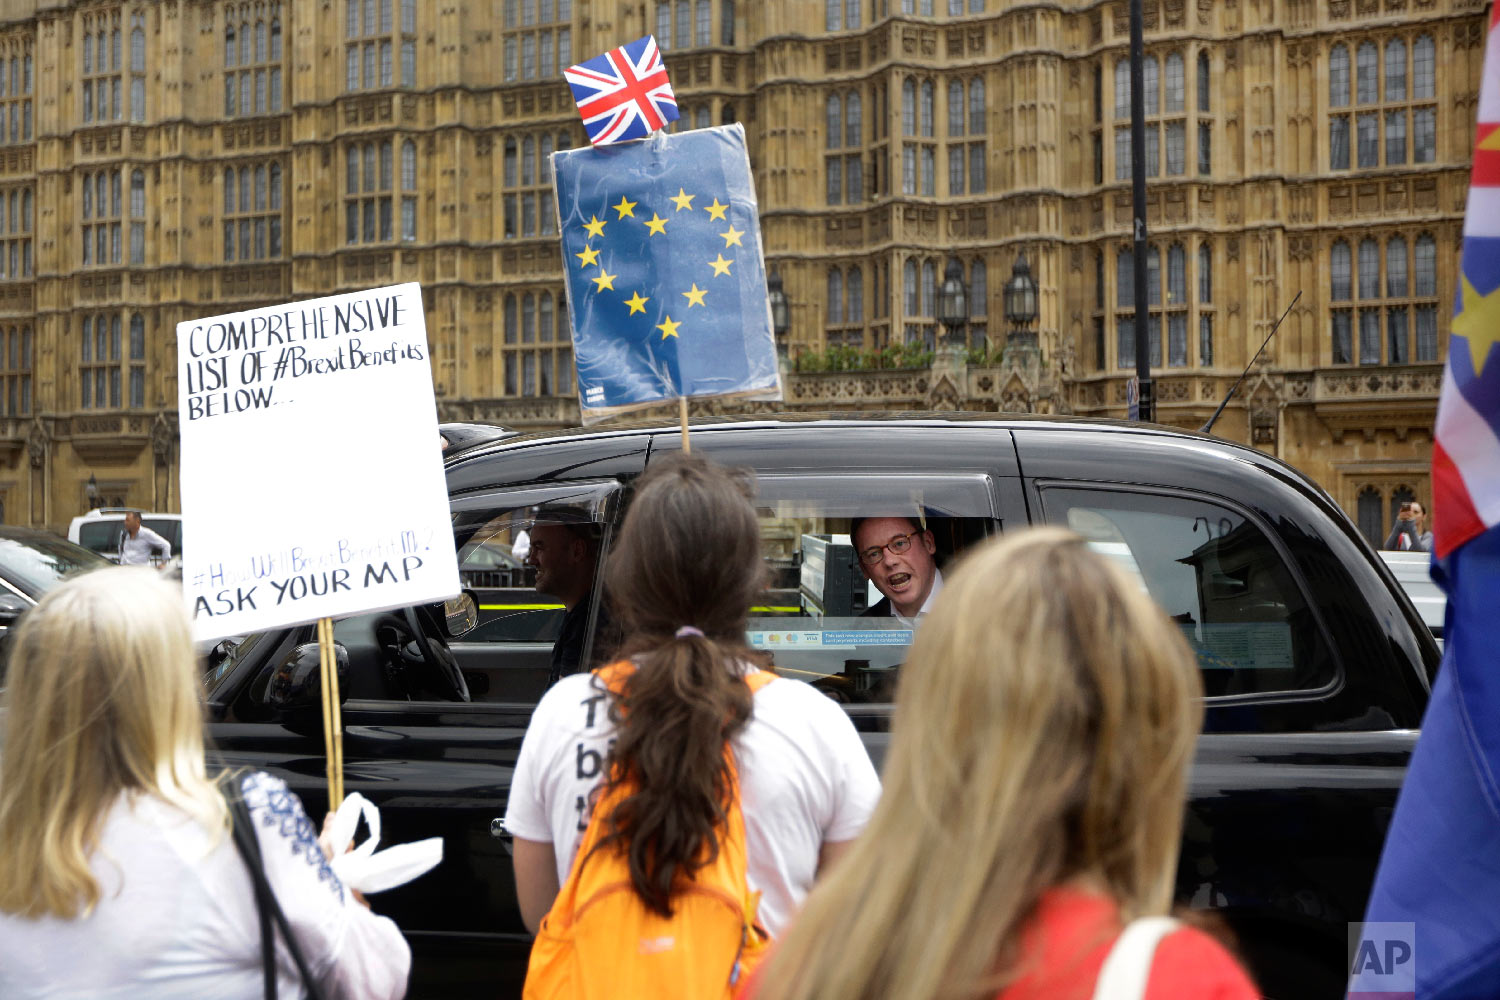  A man in a passing taxi shouts his disagreement at anti-Brexit, pro-EU supporters protesting backdropped by the Houses of Parliament in London on June 20, 2018. (AP Photo/Matt Dunham) 